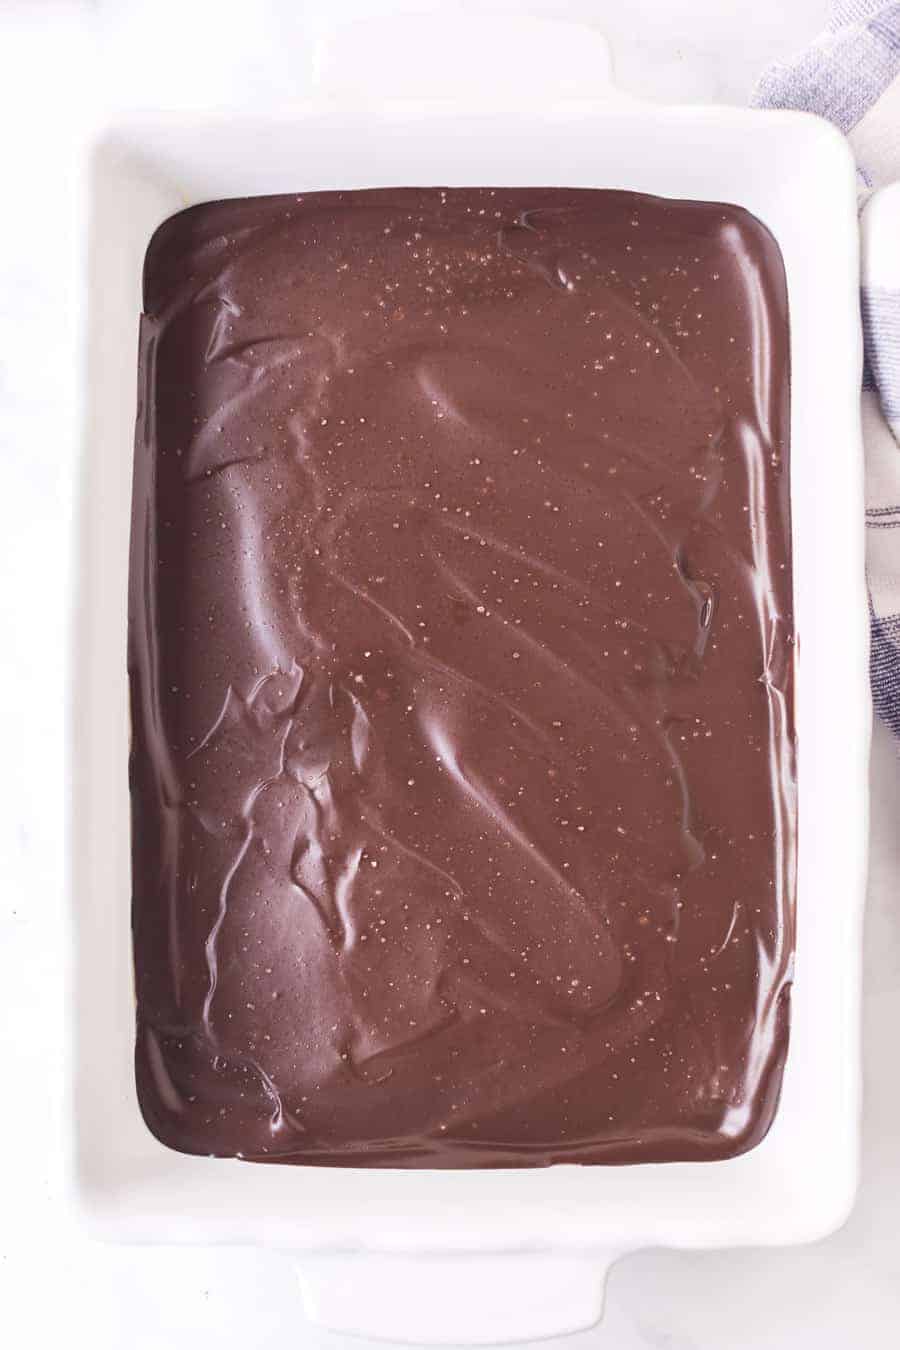 a baking dish of chocolate looking down.